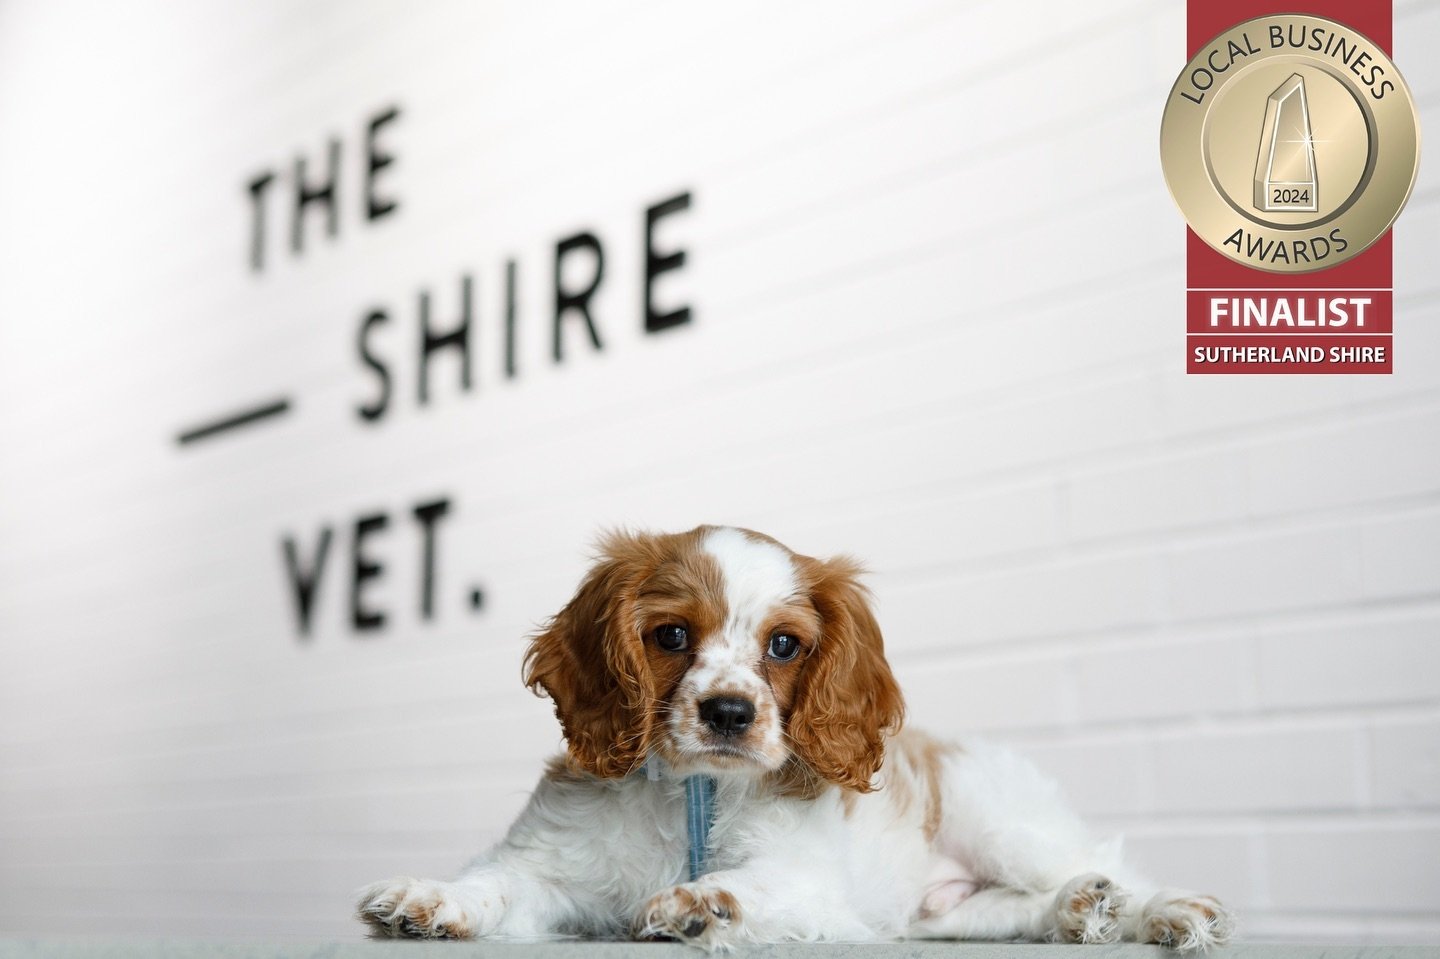 We are excited to announce we have been recognised as a finalist for Outstanding Pet Care in the local business awards. We thank you all for nominating The Shire Vet and for your continued support 🐾